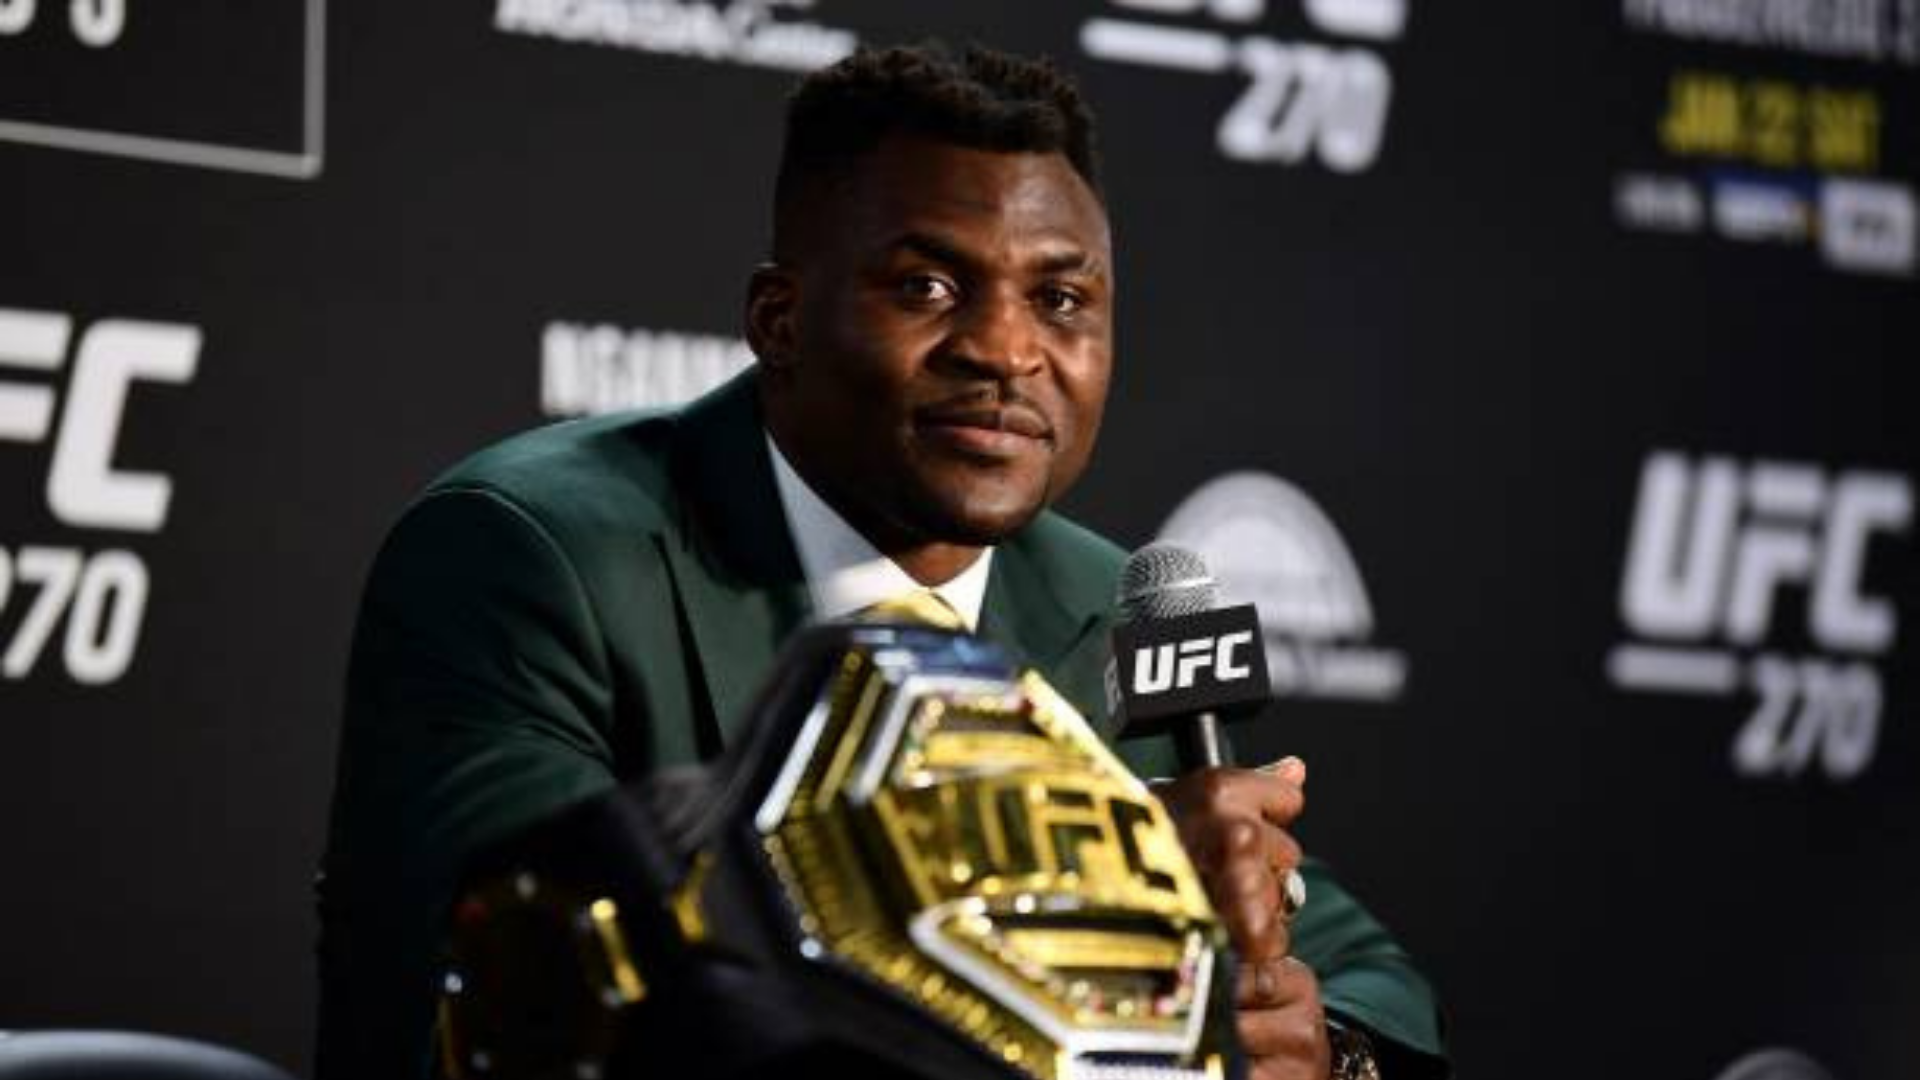 Francis Ngannou Details Frustration With Current Ufc Contract Fightful News 2467